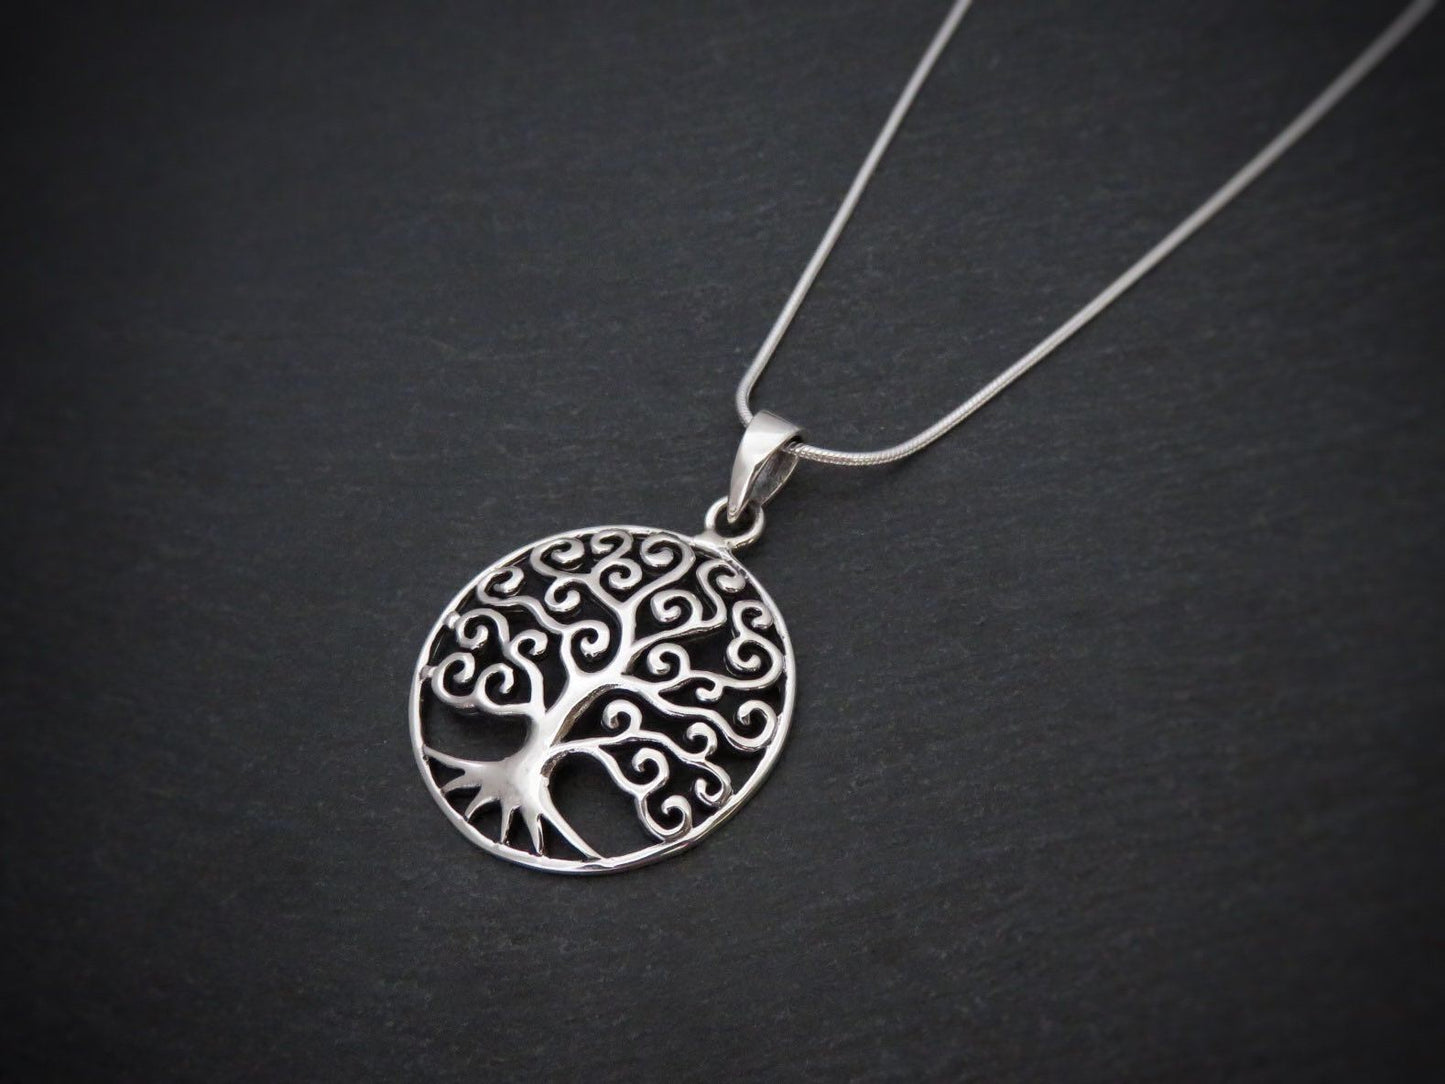 Domed pendant with the motif of the tree of life made of silver 